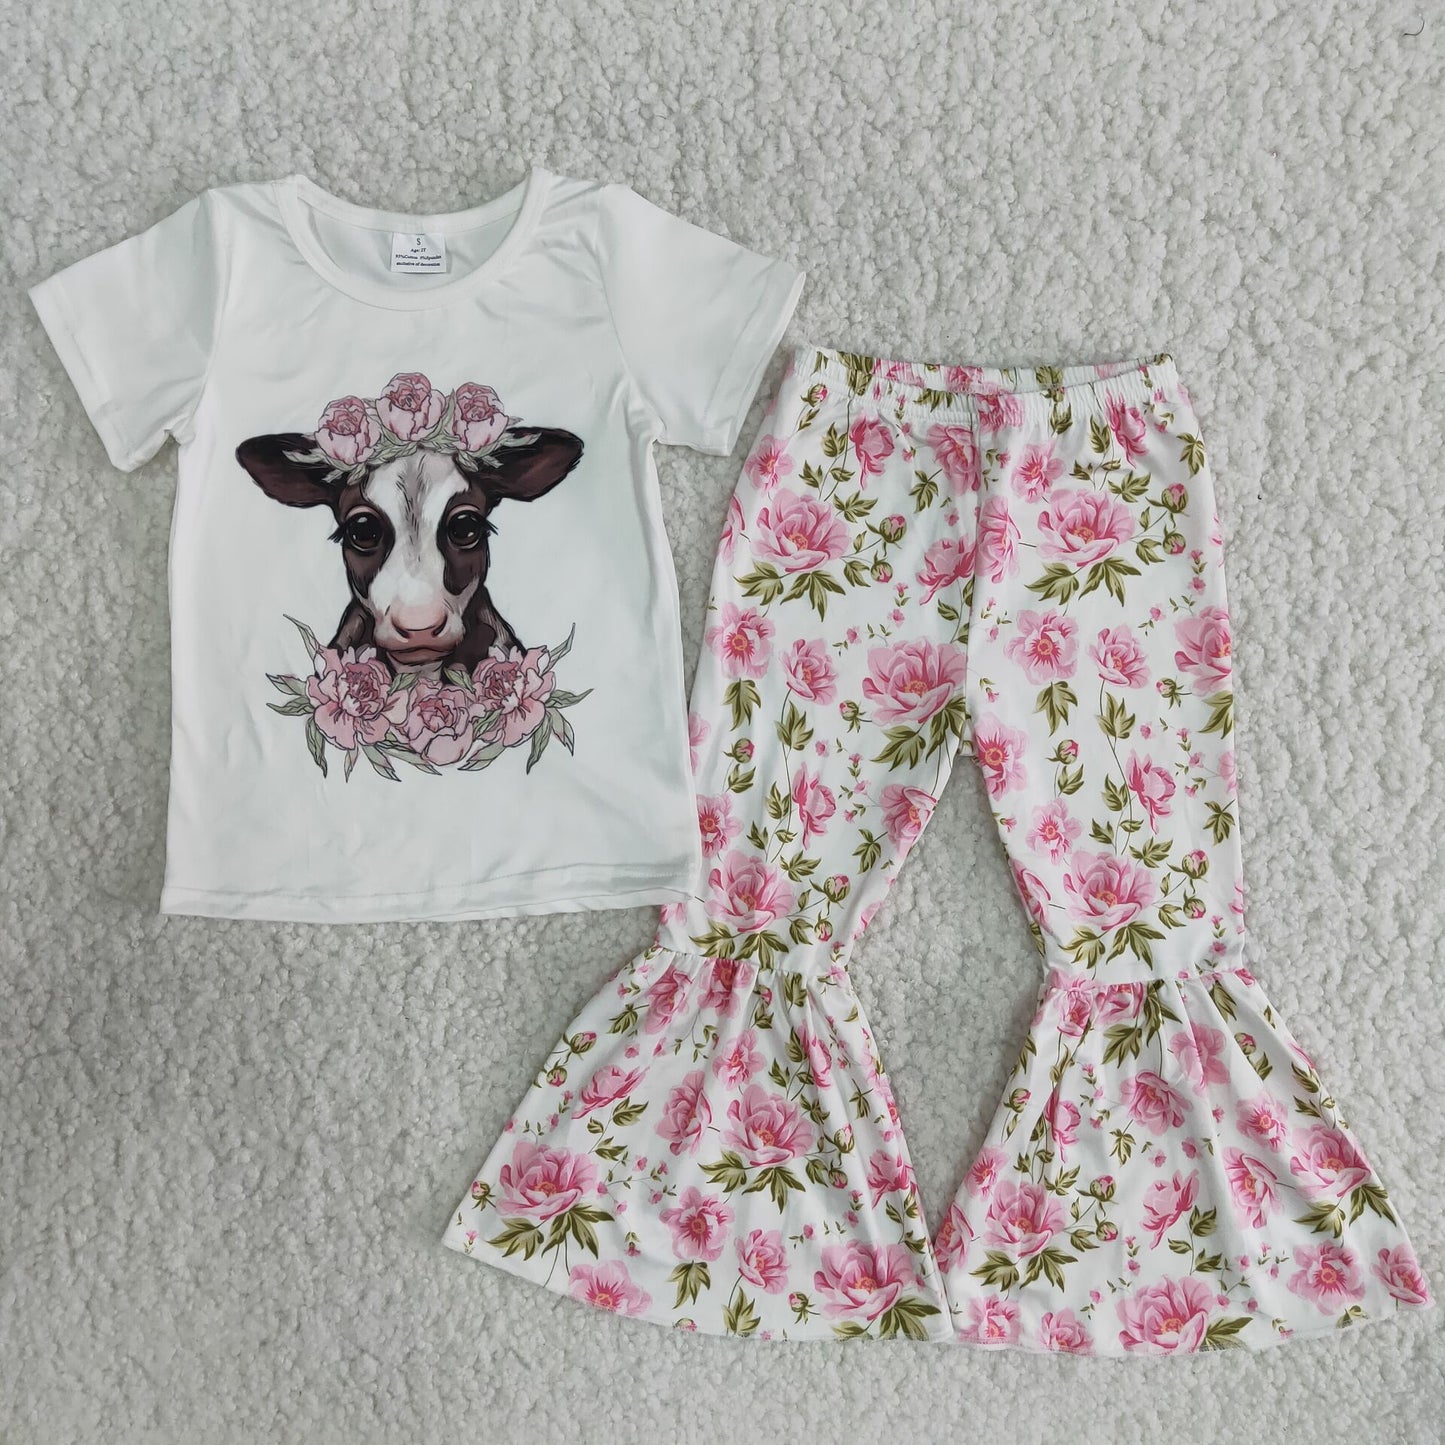 spring cute girl's floral pants set outfit children clothing